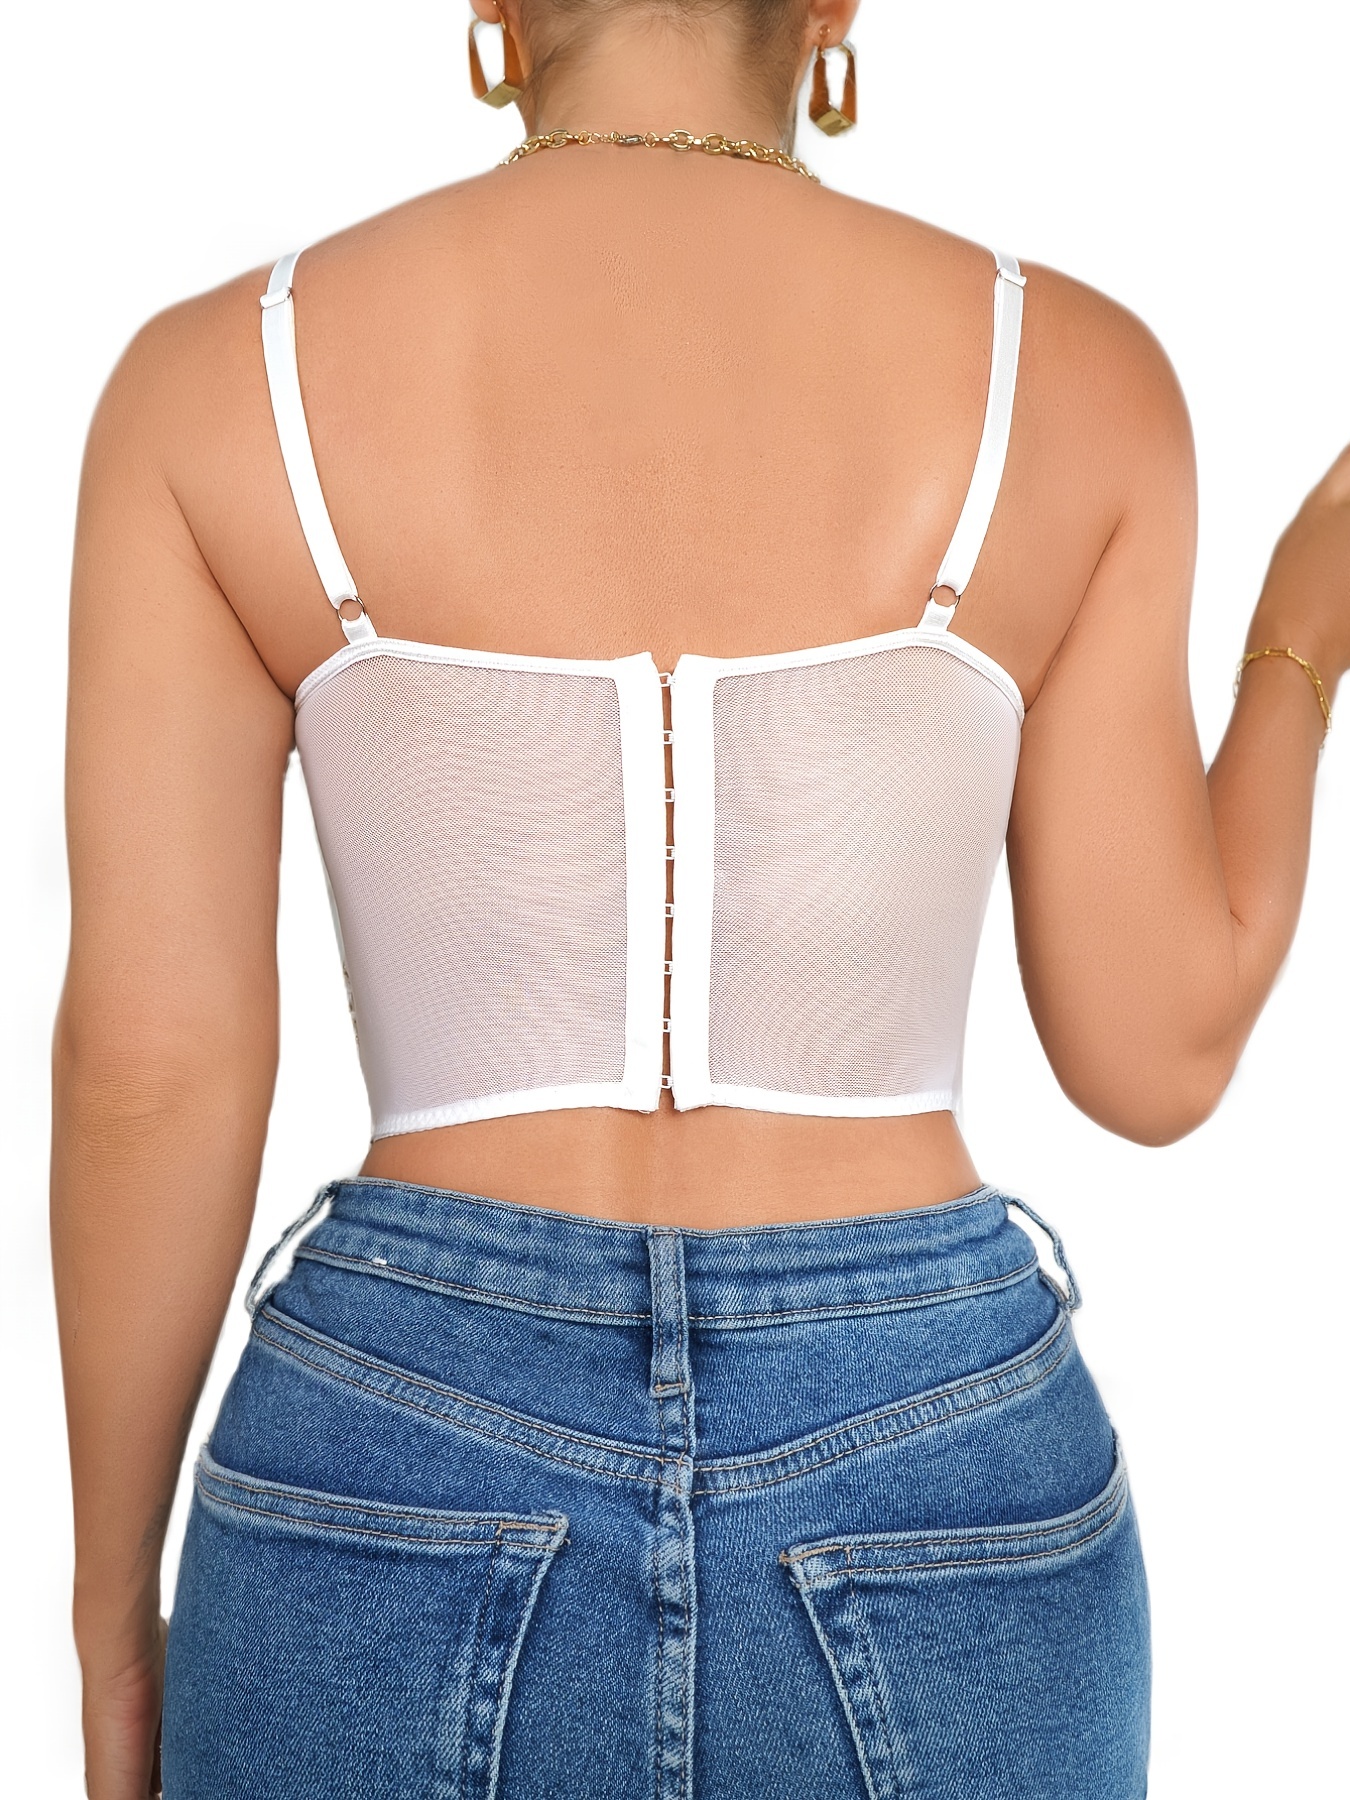 Lace Corset Top For Women Drawstring Mesh Strap Slim Push Up Going Out  Camisole Tank Tops 